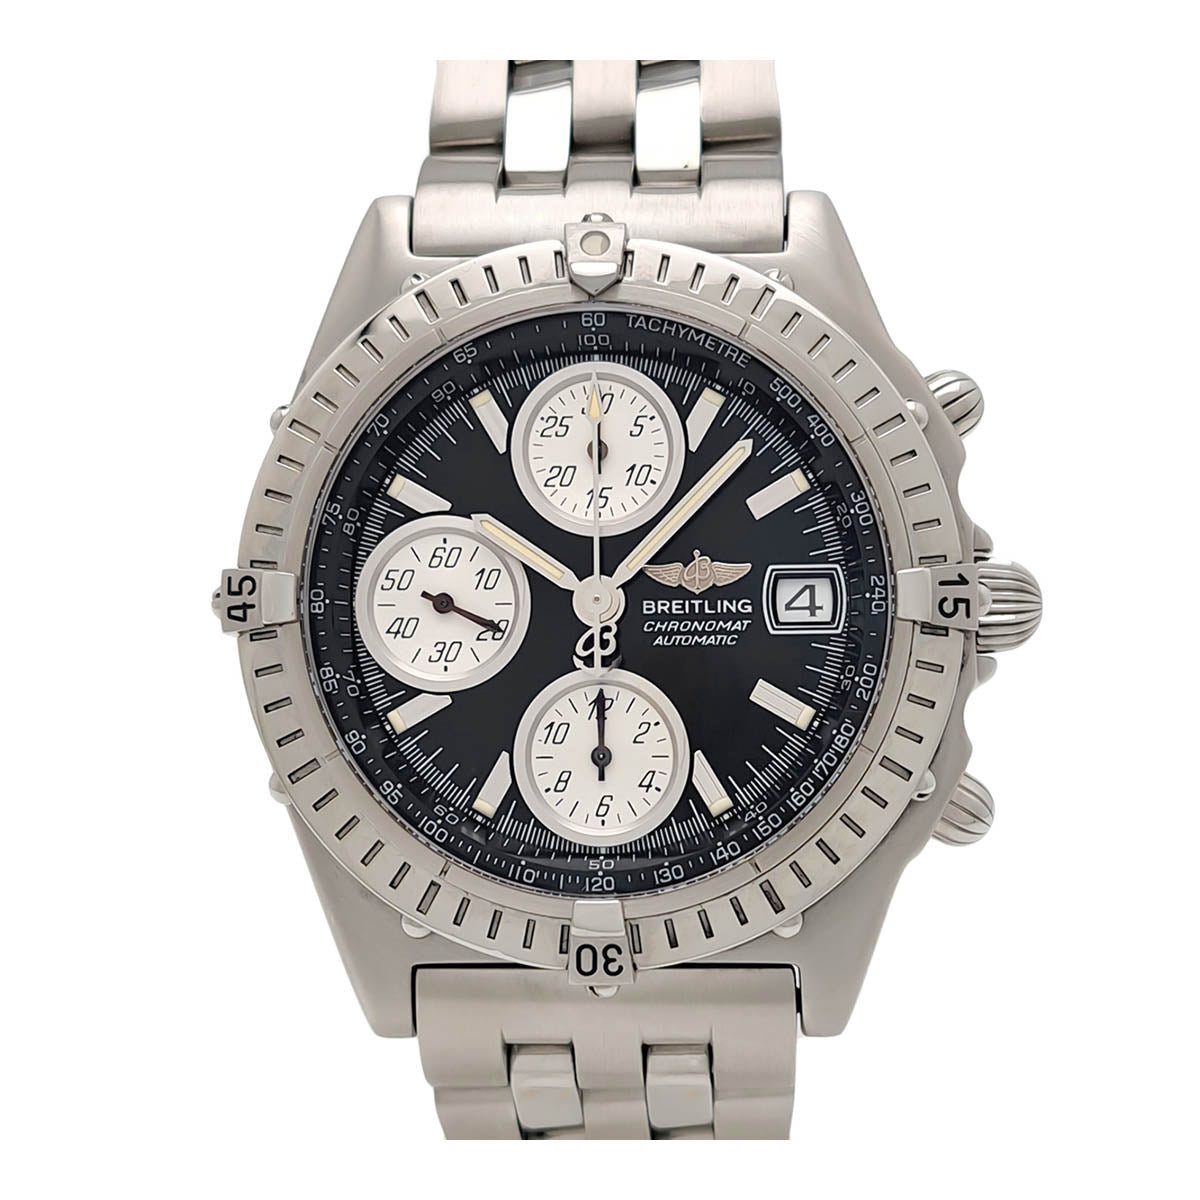 Breitling "Chronomat Blackbird Chronograph Overhauled A13350" Men's Automatic Wristwatch in Stainless Steel A13350